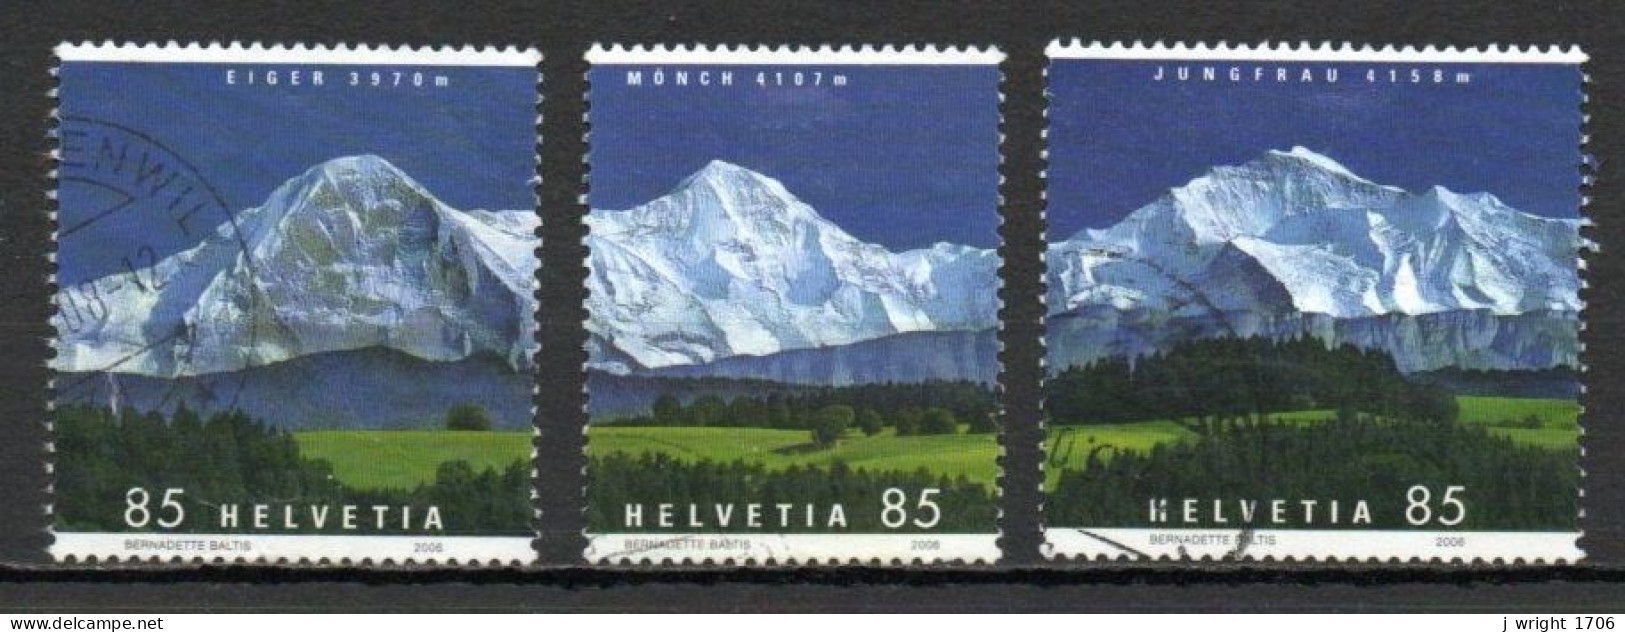 Switzerland, 2006, Mountains, Set, USED - Used Stamps